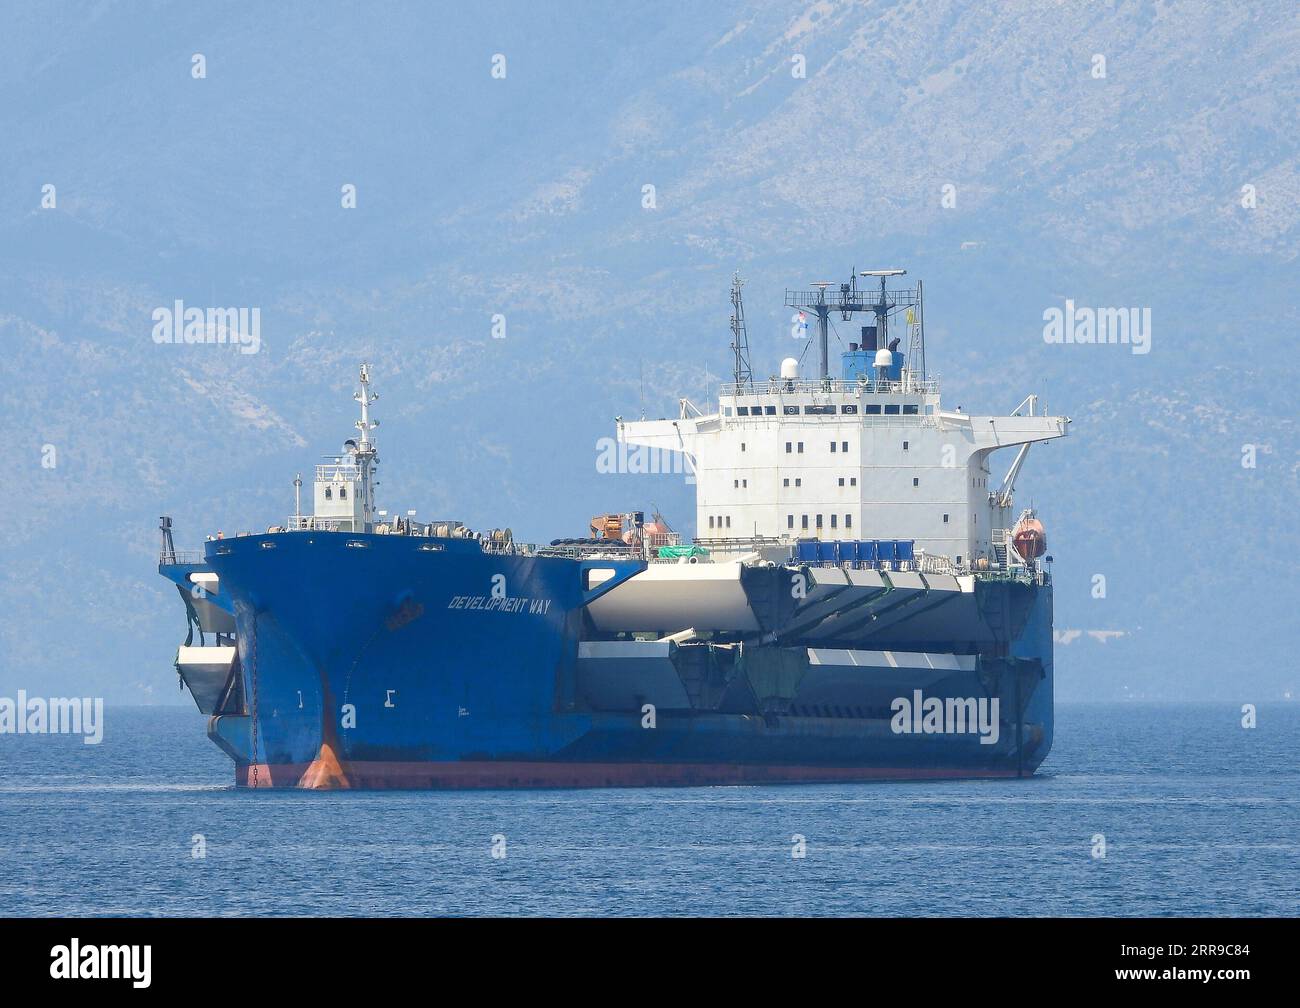 210609 -- PLOCE, June 9, 2021 -- A cargo ship carrying the final batch of steel box girders for the construction of the Peljesac Bridge arrive at the Port of Ploce, Croatia, June 8, 2021. The construction of the Peljesac Bridge, the biggest infrastructure project in Croatia, will be completed in June 2022. Photo by /Pixsell via Xinhua CROATIA-PLOCE-CARGO SHIP-PELJESAC BRIDGE IvoxCagalj PUBLICATIONxNOTxINxCHN Stock Photo